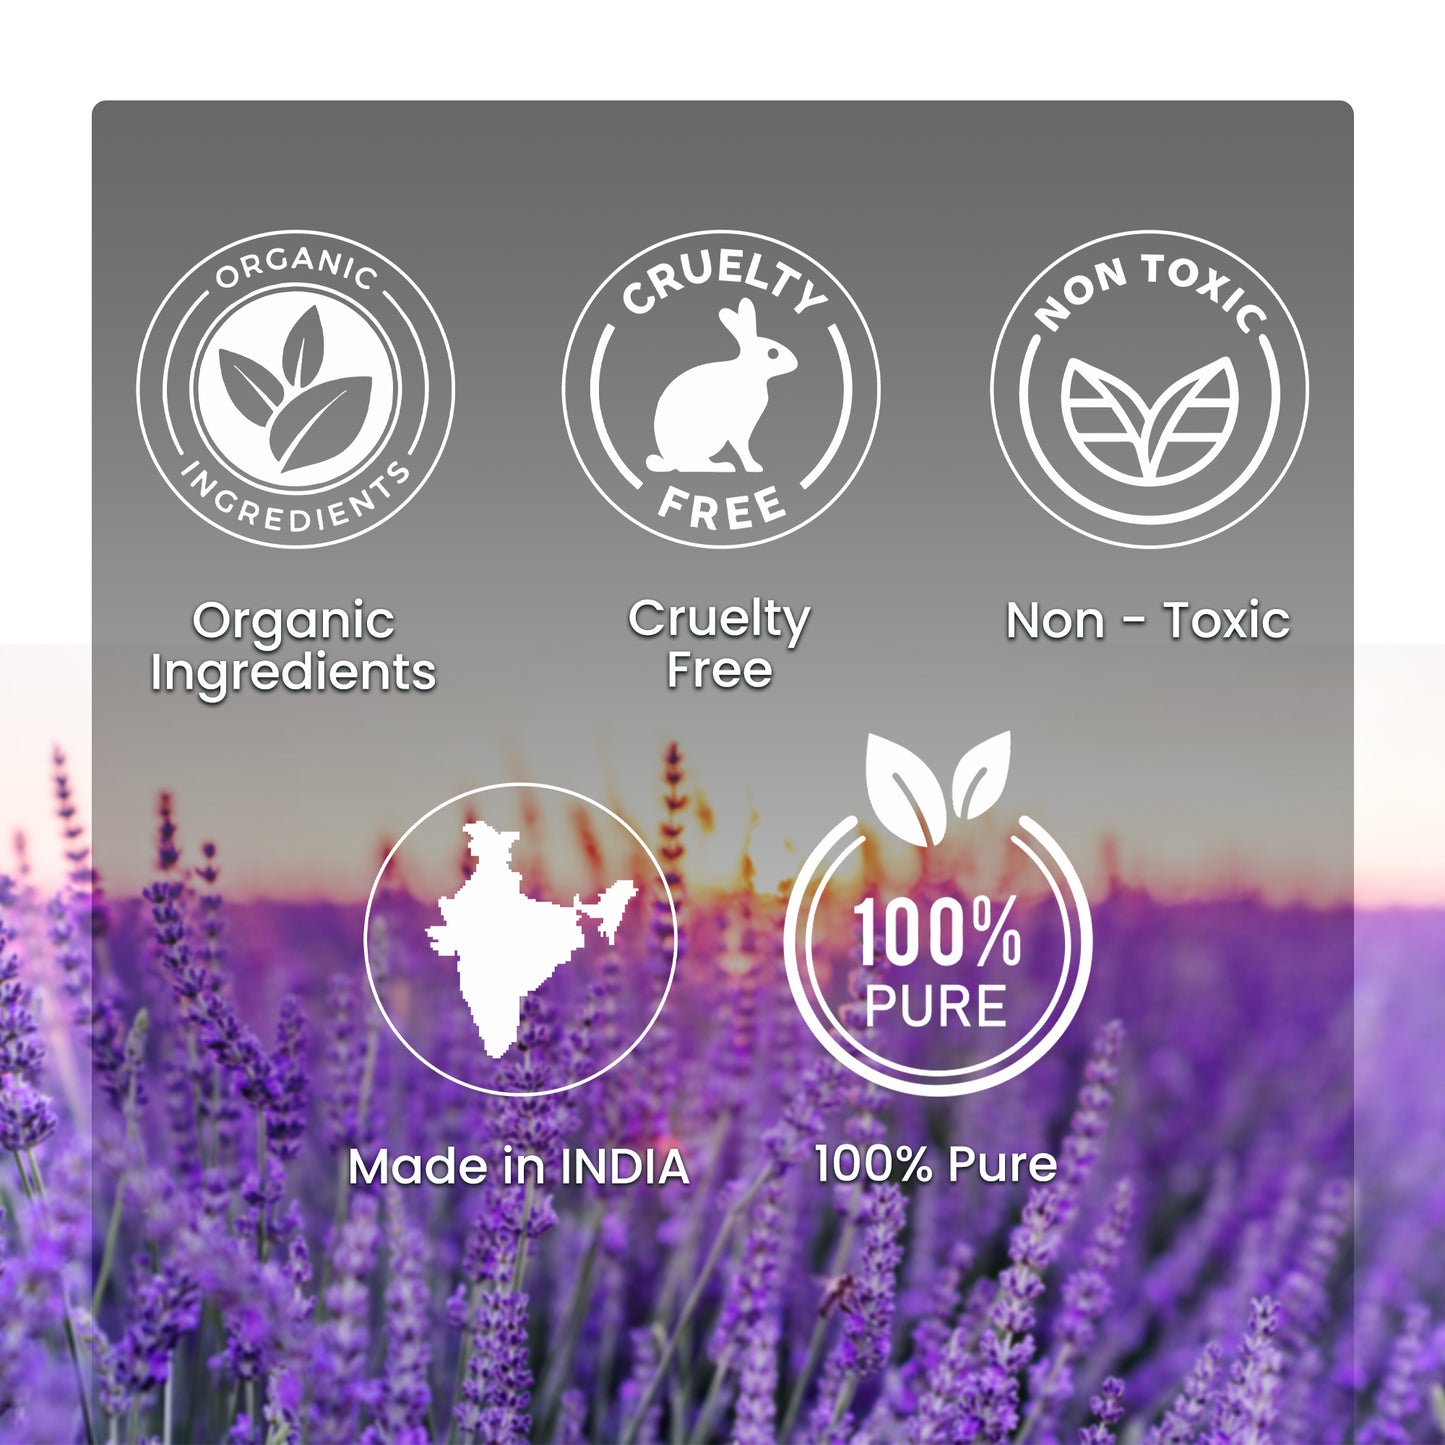 REGAL ESSENCE Lavender Essential Oil for Healthy Hair, Skin, Sleep - 100% Pure, Natural and Undiluted Paraben, Silicone Free 15ML Regal Essence